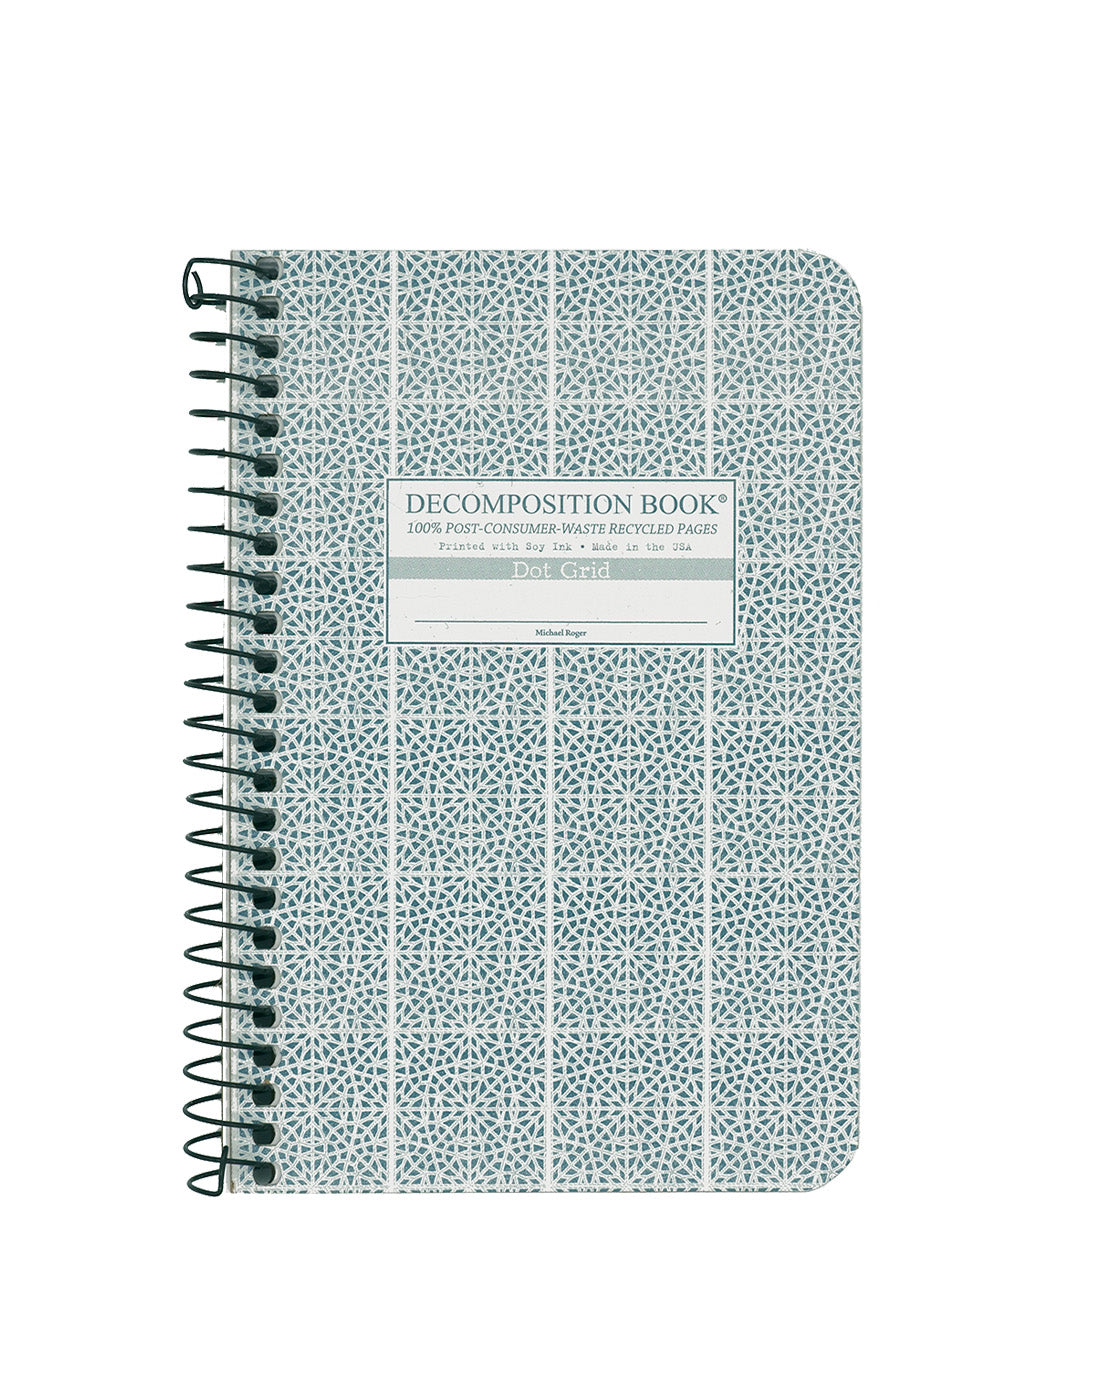 Spiral notebook printed with a geometric pattern in light blue